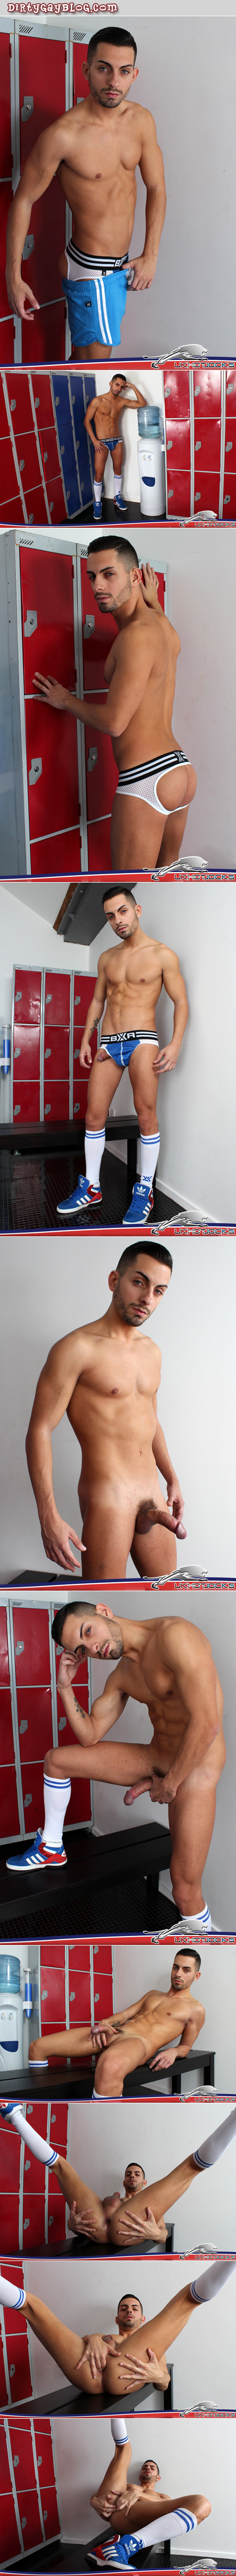 Fit young Latino stripping out of his athletic gear to jockbriefs and socks before exposing his large uncut cock and fingering his asshole.